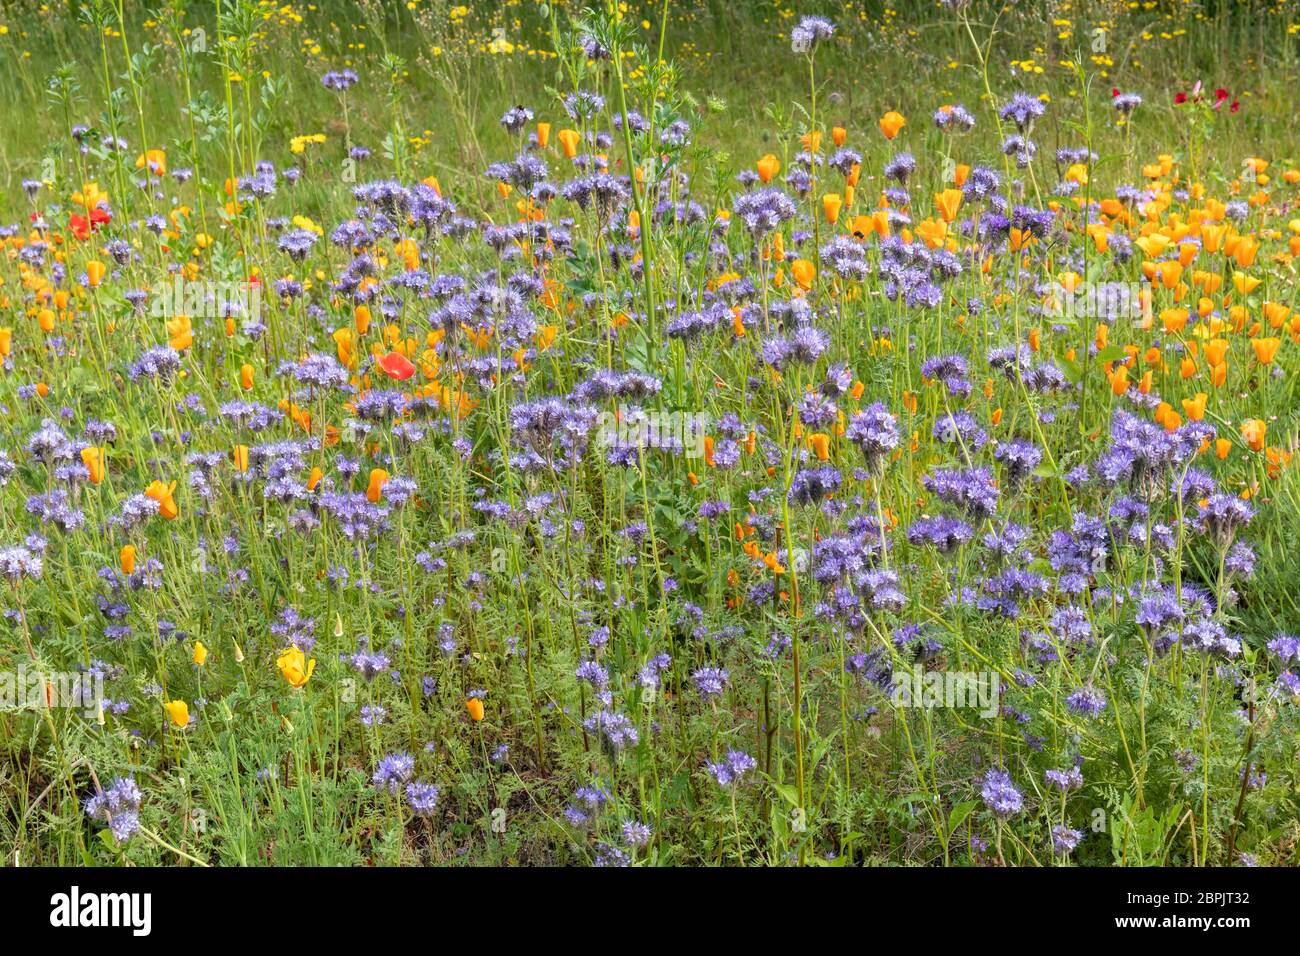 Close up of wildflowers flowering in a border on the edge of a park in England, UK. Phacelia Green Manure Stock Photo